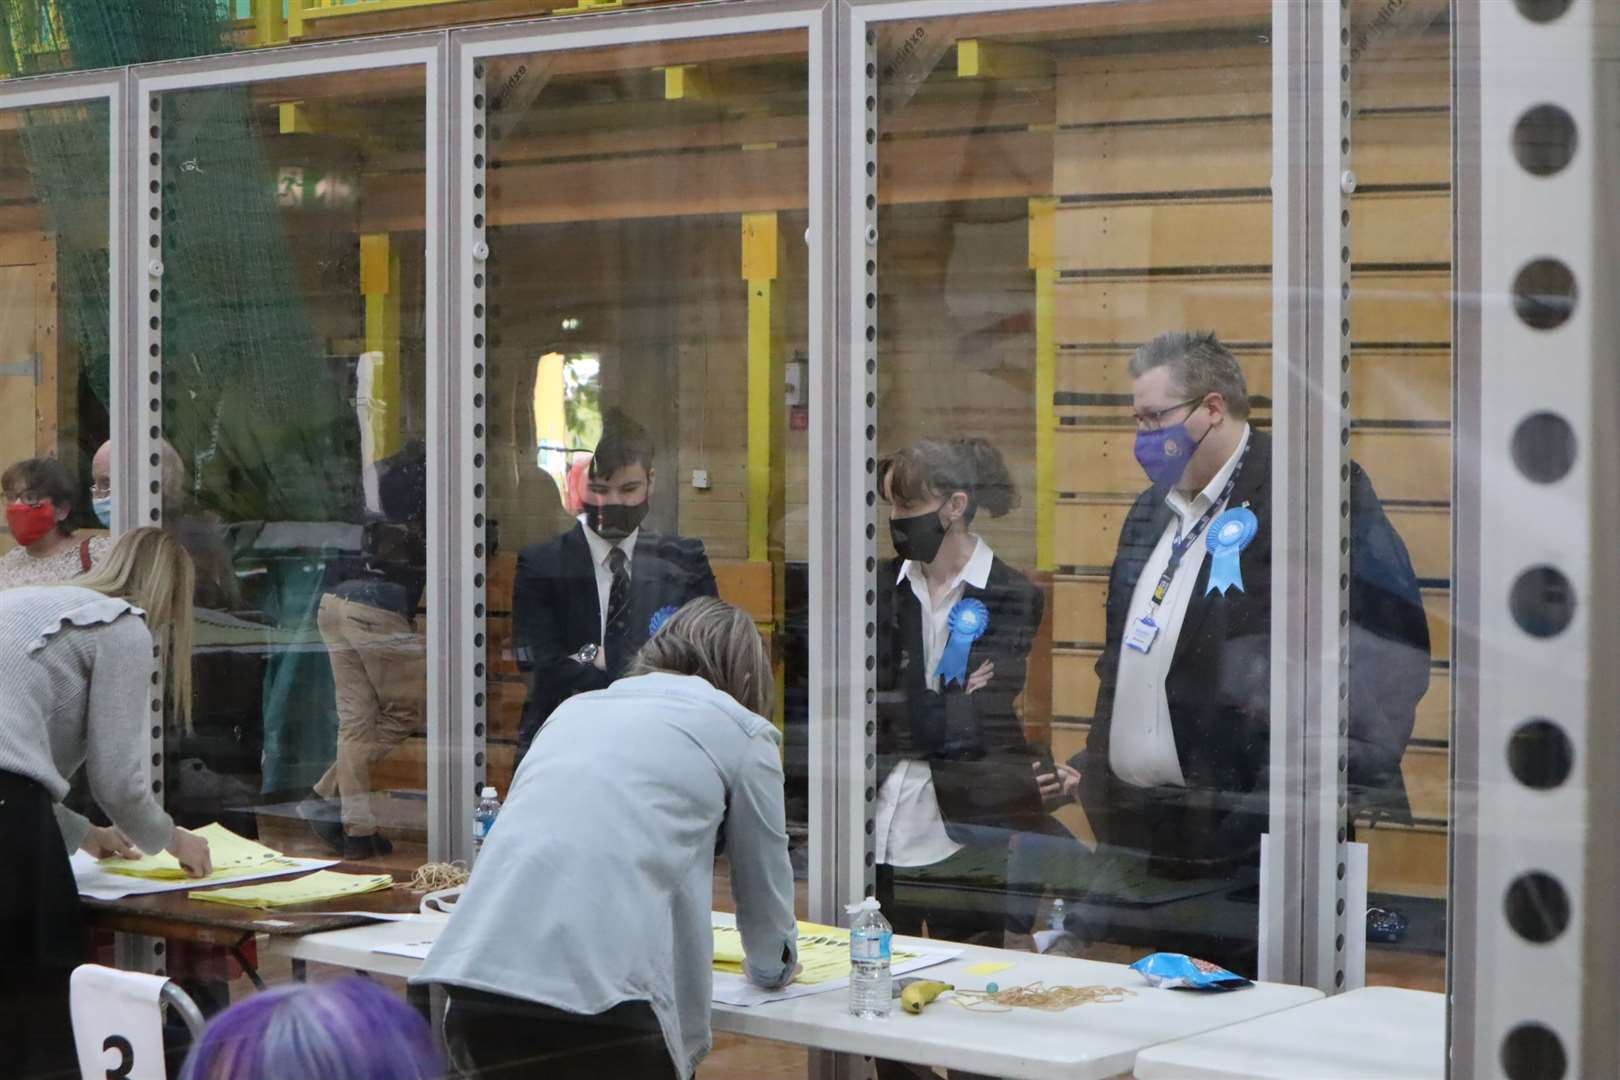 Cameron Beart, Conservative, anxiously watches through the Perspex sheeting as the Sheppey vote is counted for the KCC elections at Swallows Leisure Centre, Sittingbourne